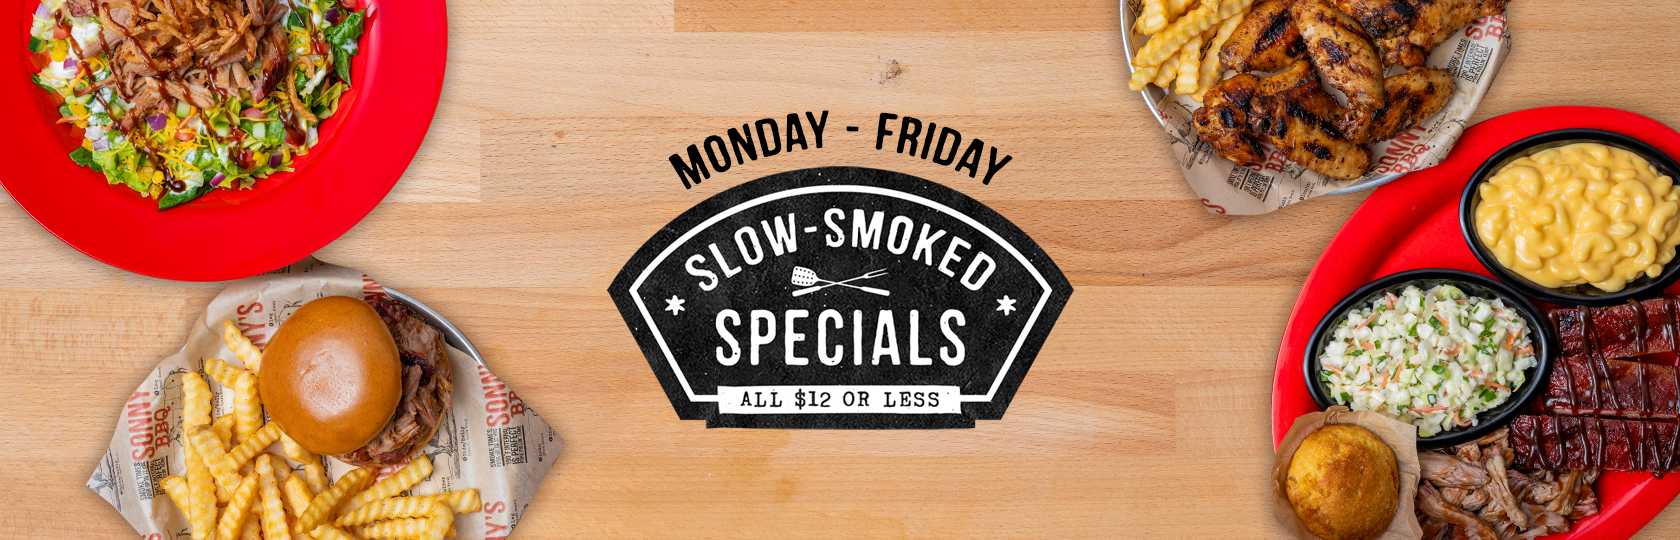 $12 or Less: Dig into Sonny's Slow-Smoked Specials Monday through Friday -  Sonny's BBQ